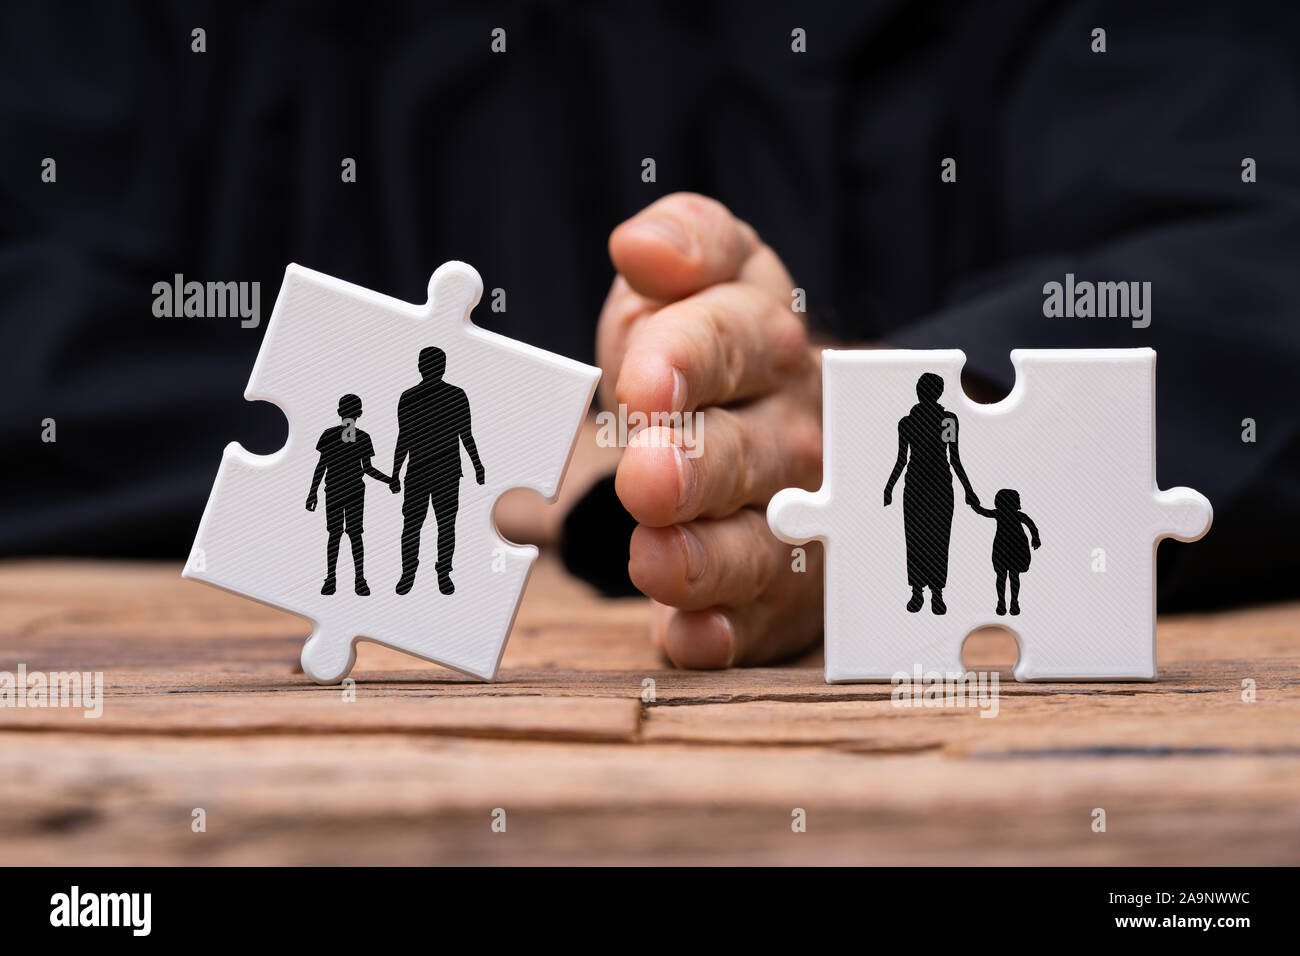 Man Dividing Two Jigsaw Puzzle Pieces With Hand Showing Divorce Concept Over Textured Wooden Desk Stock Photo